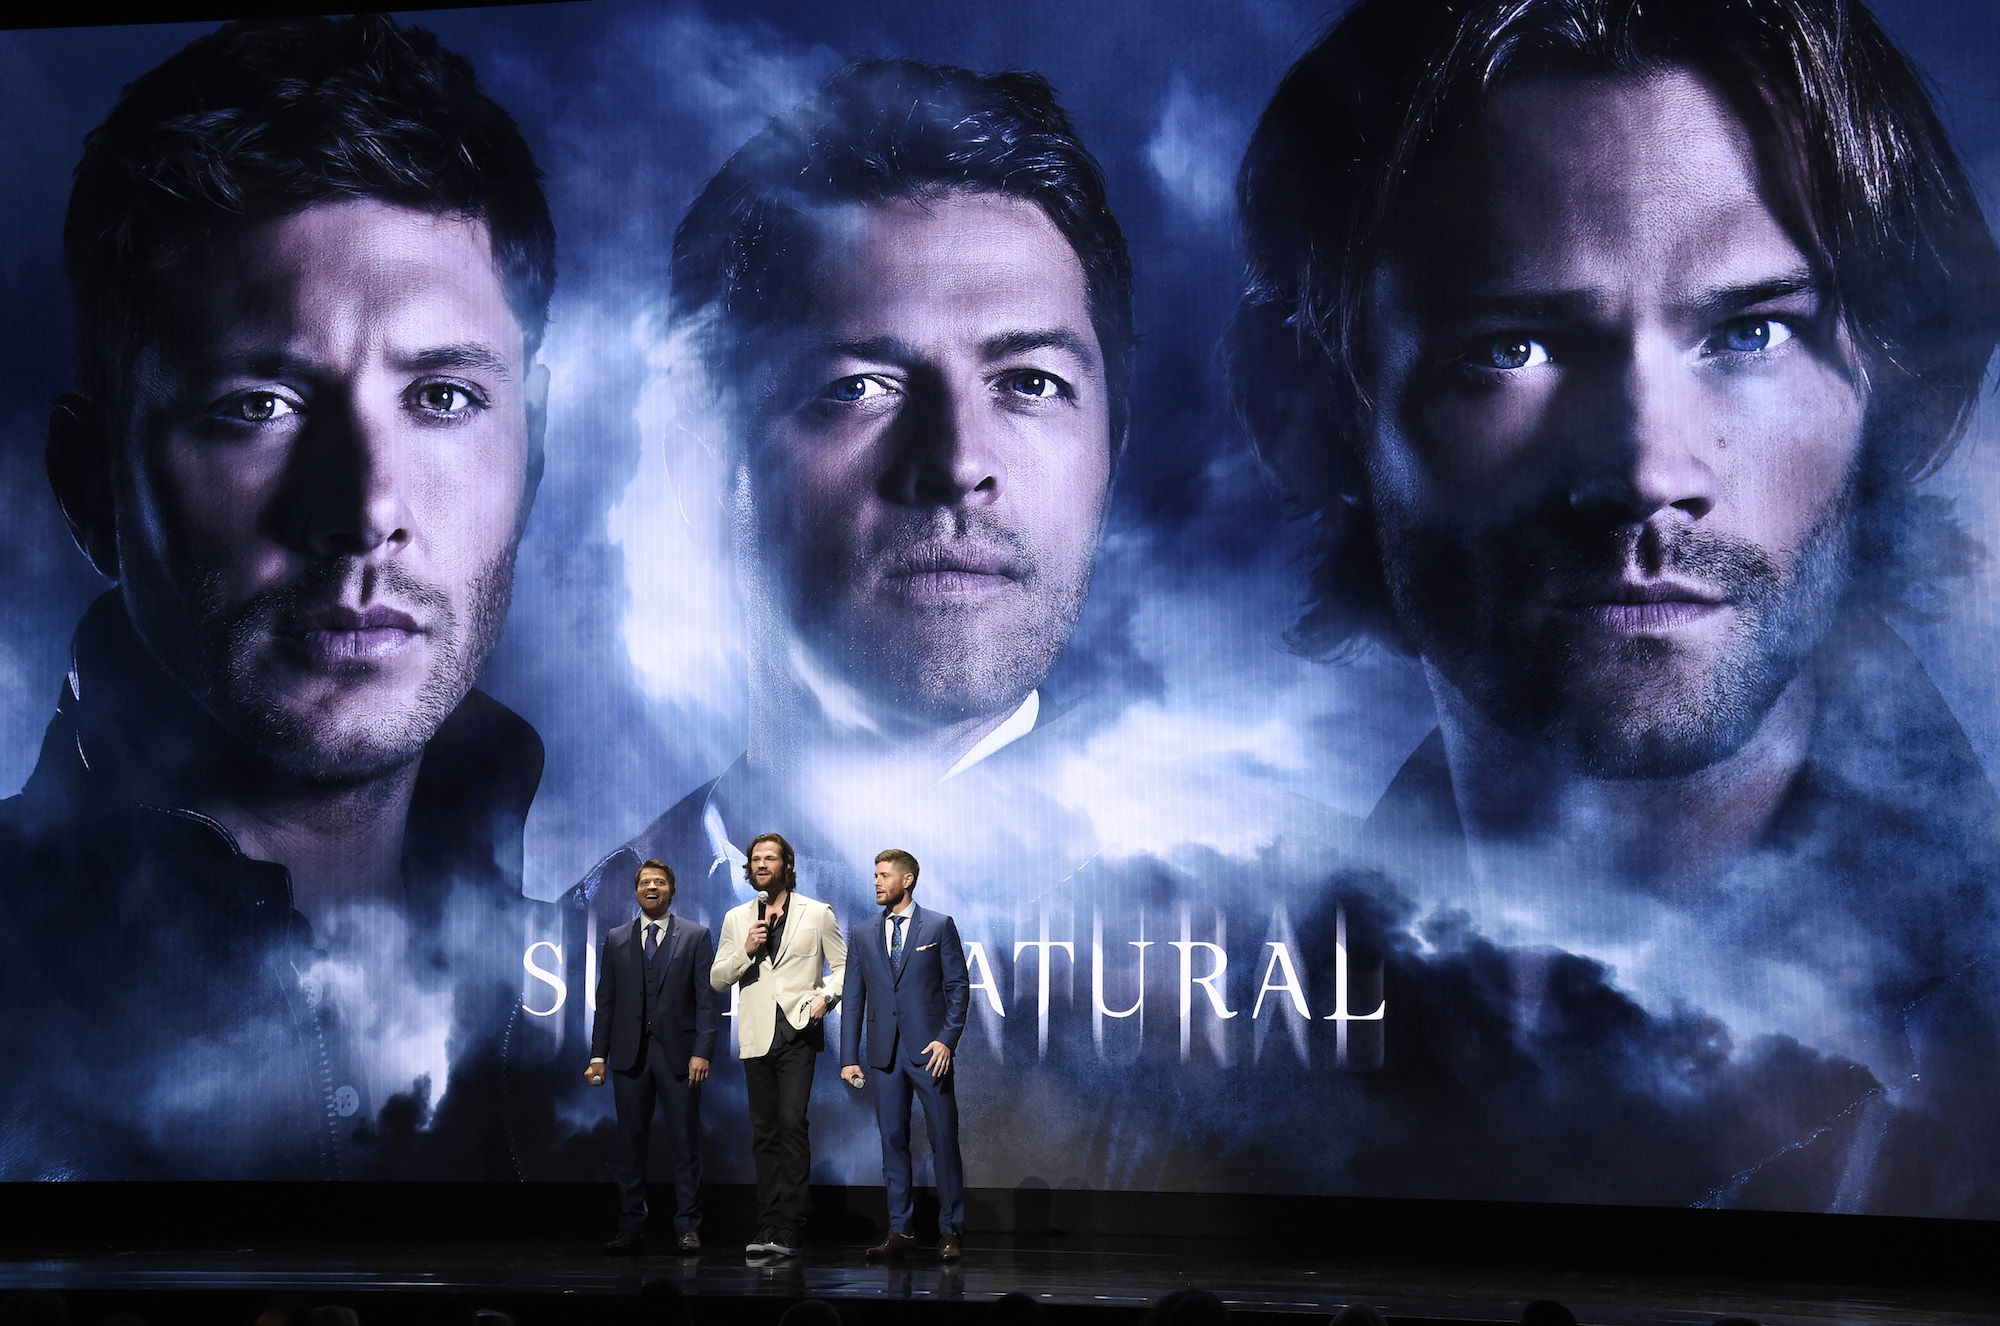 'Supernatural' stars Misha Collins, Jared Padalecki and Jensen Ackles stand in front of their poster